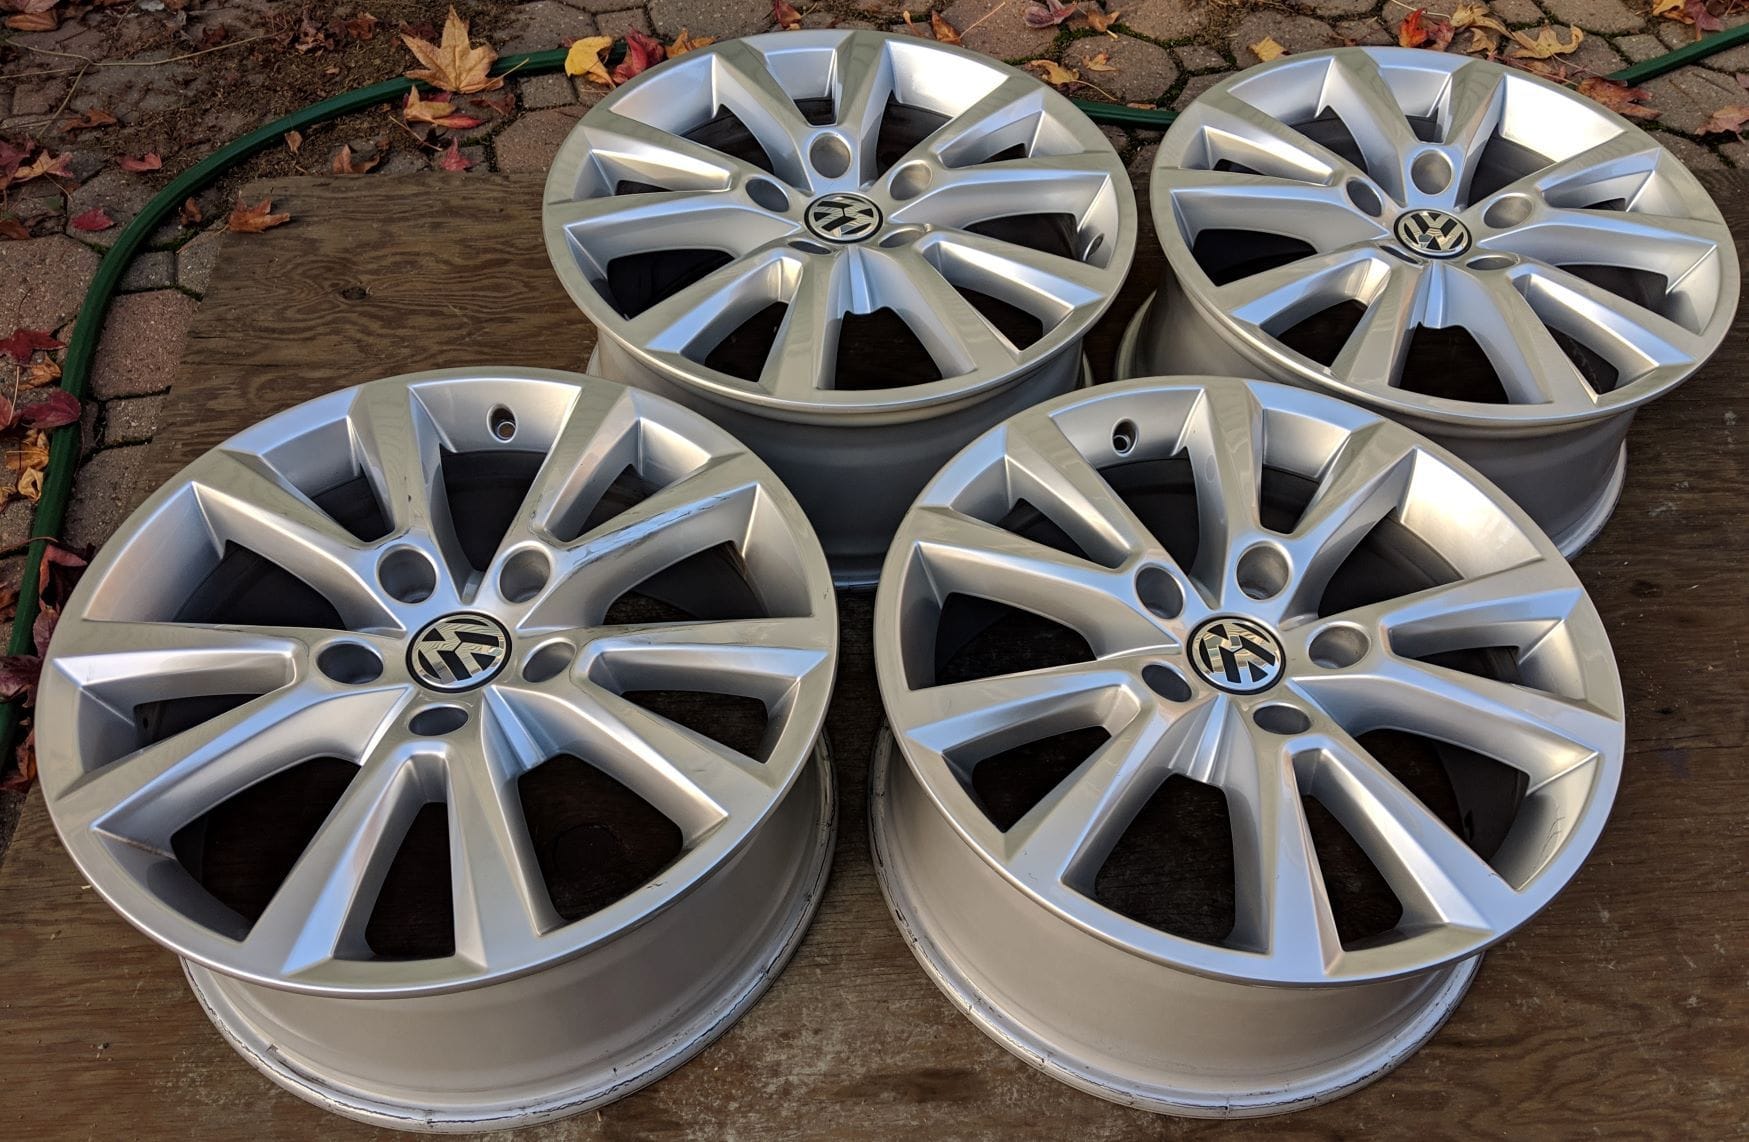 Wheels and Tires/Axles - 18x8 wheels for Cayenne Q7 Touareg - Used - 2011 to 2017 Porsche Cayenne - 2007 to 2014 Audi Q7 - 2010 to 2017 Volkswagen Touareg - San Leandro, CA 94577, United States